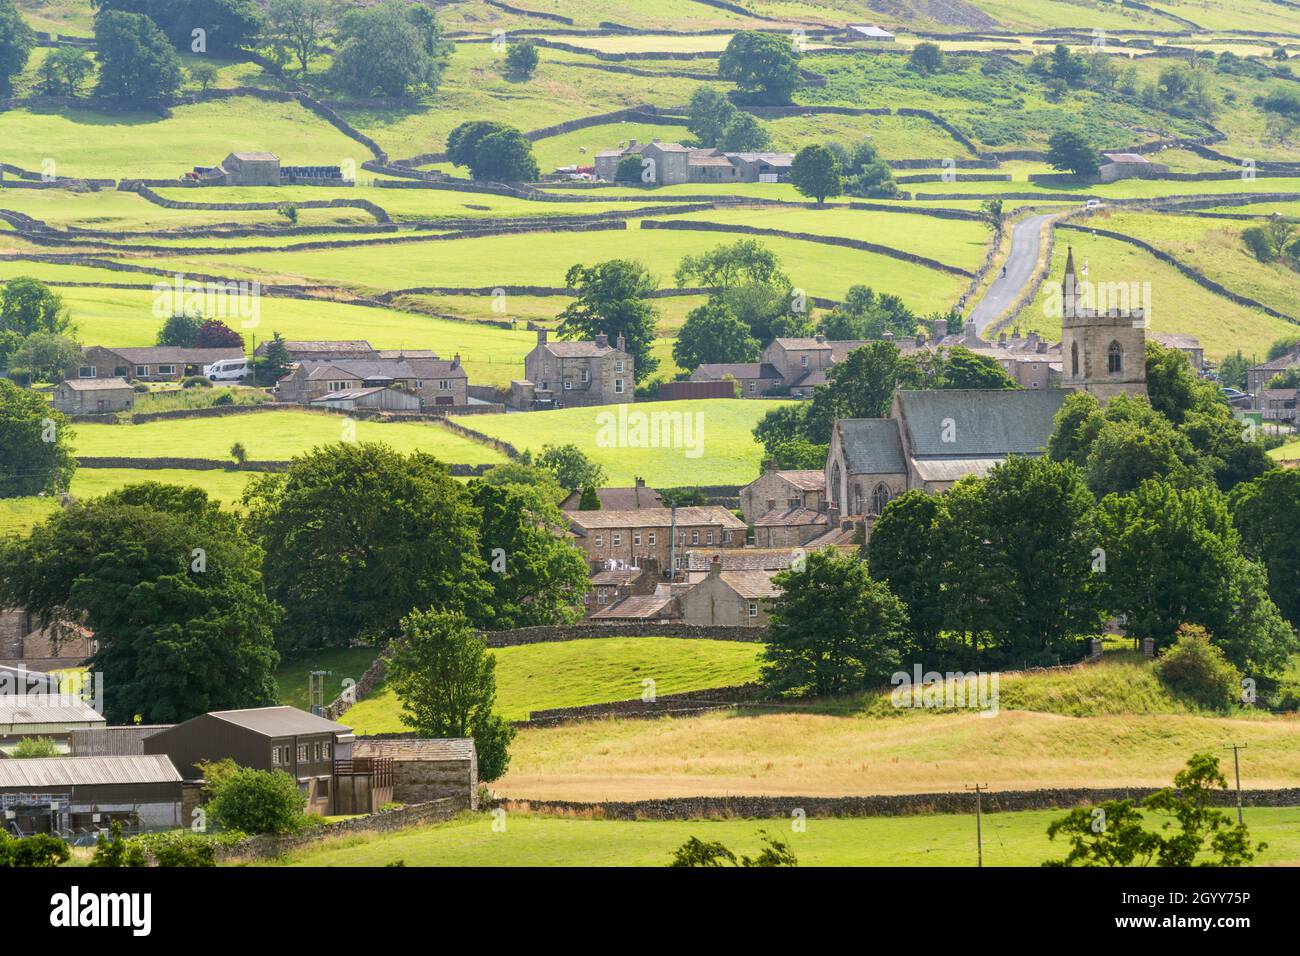 Hawes città mercato in Upper Wensleydale, lo Yorkshire Dales, Inghilterra. Foto Stock